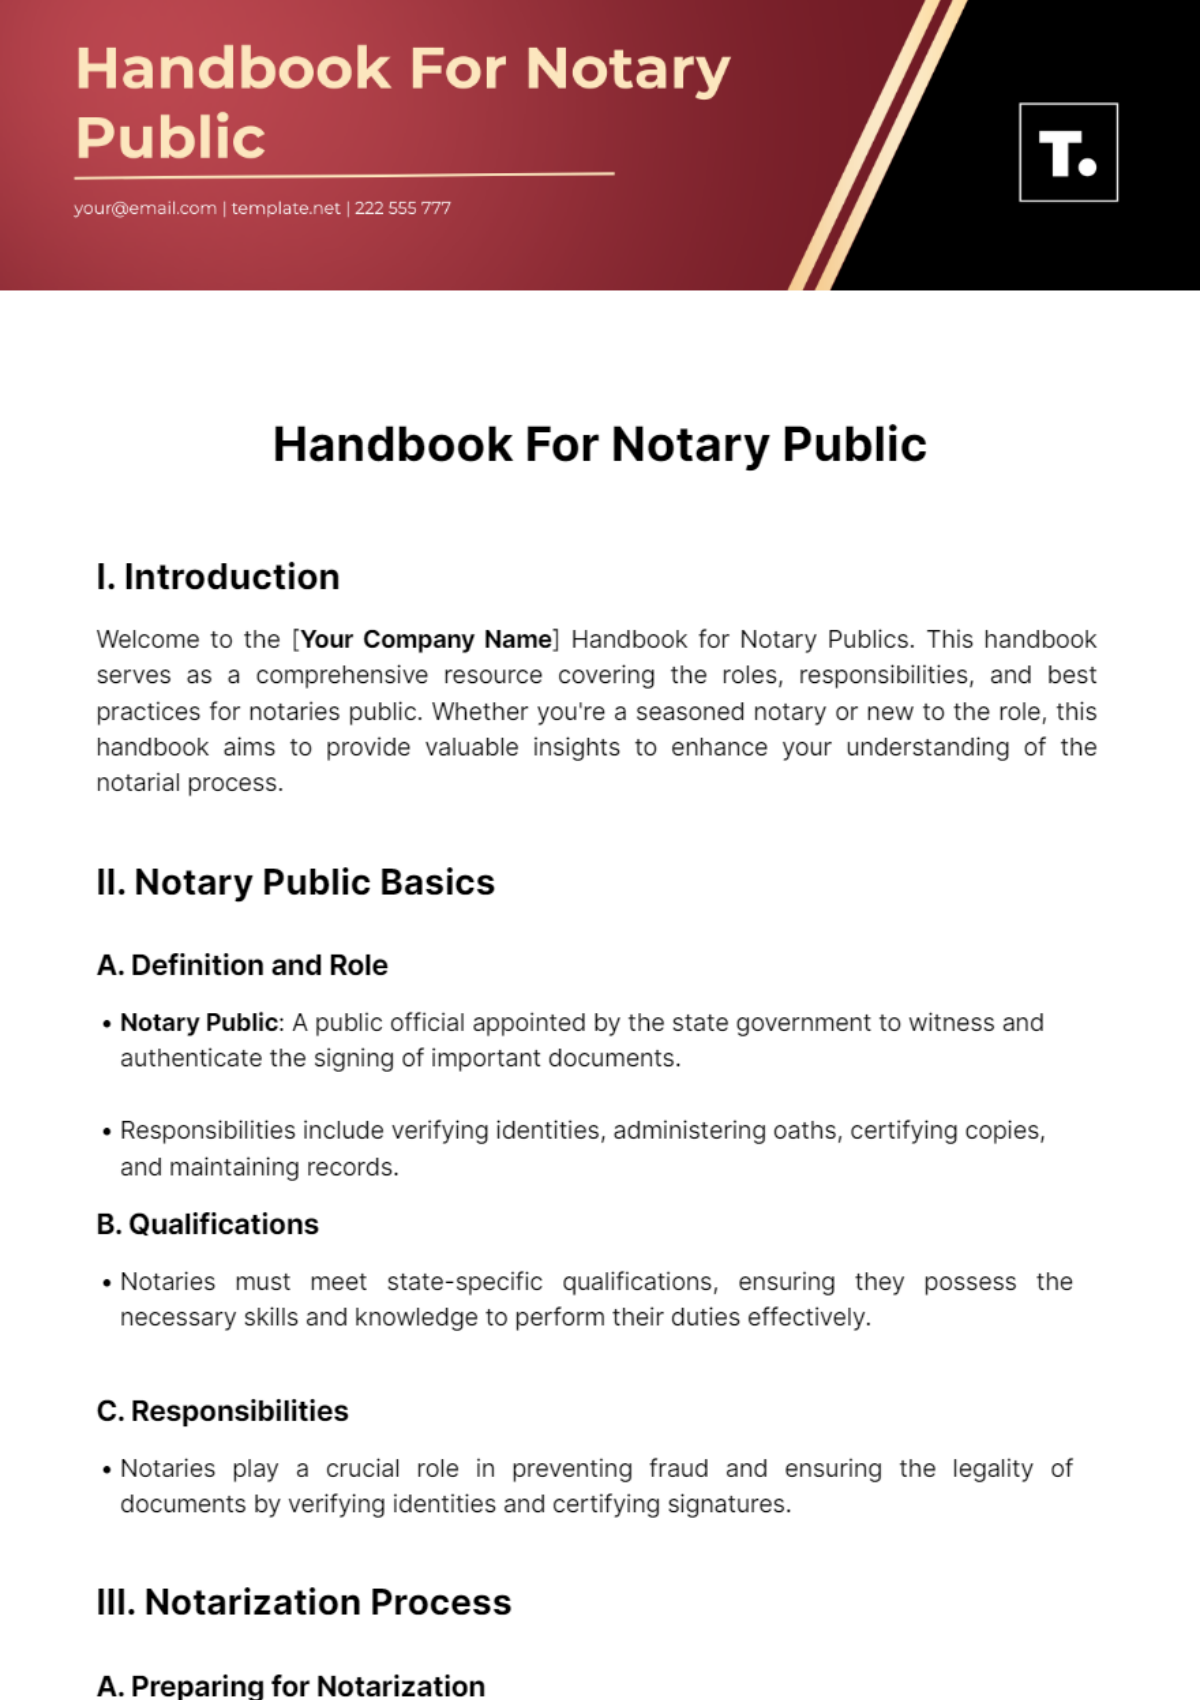 Handbook For Notary Public Template